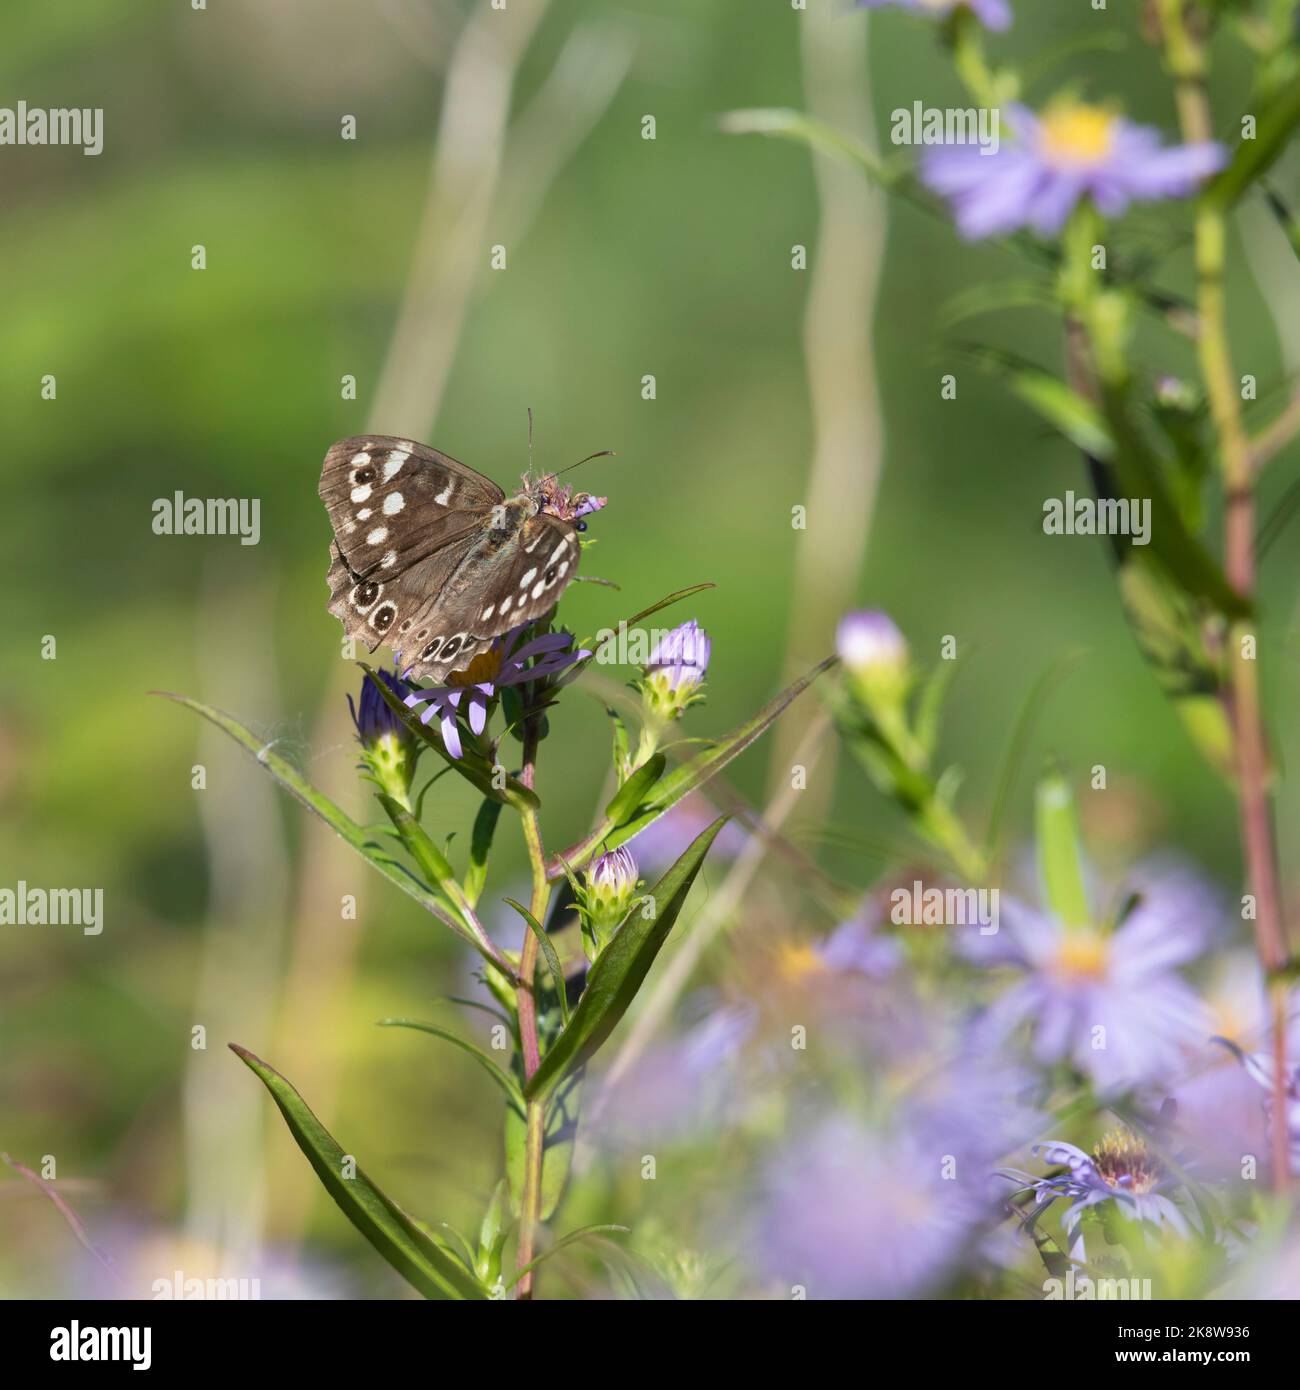 A Speckled Wood Butterfly (Pararge Aegeria) Basking in Afternoon Sunshine on Michaelmas Daisy Flowers (Symphyotrichum Novi-Belgii) in Early Autumn Stock Photo